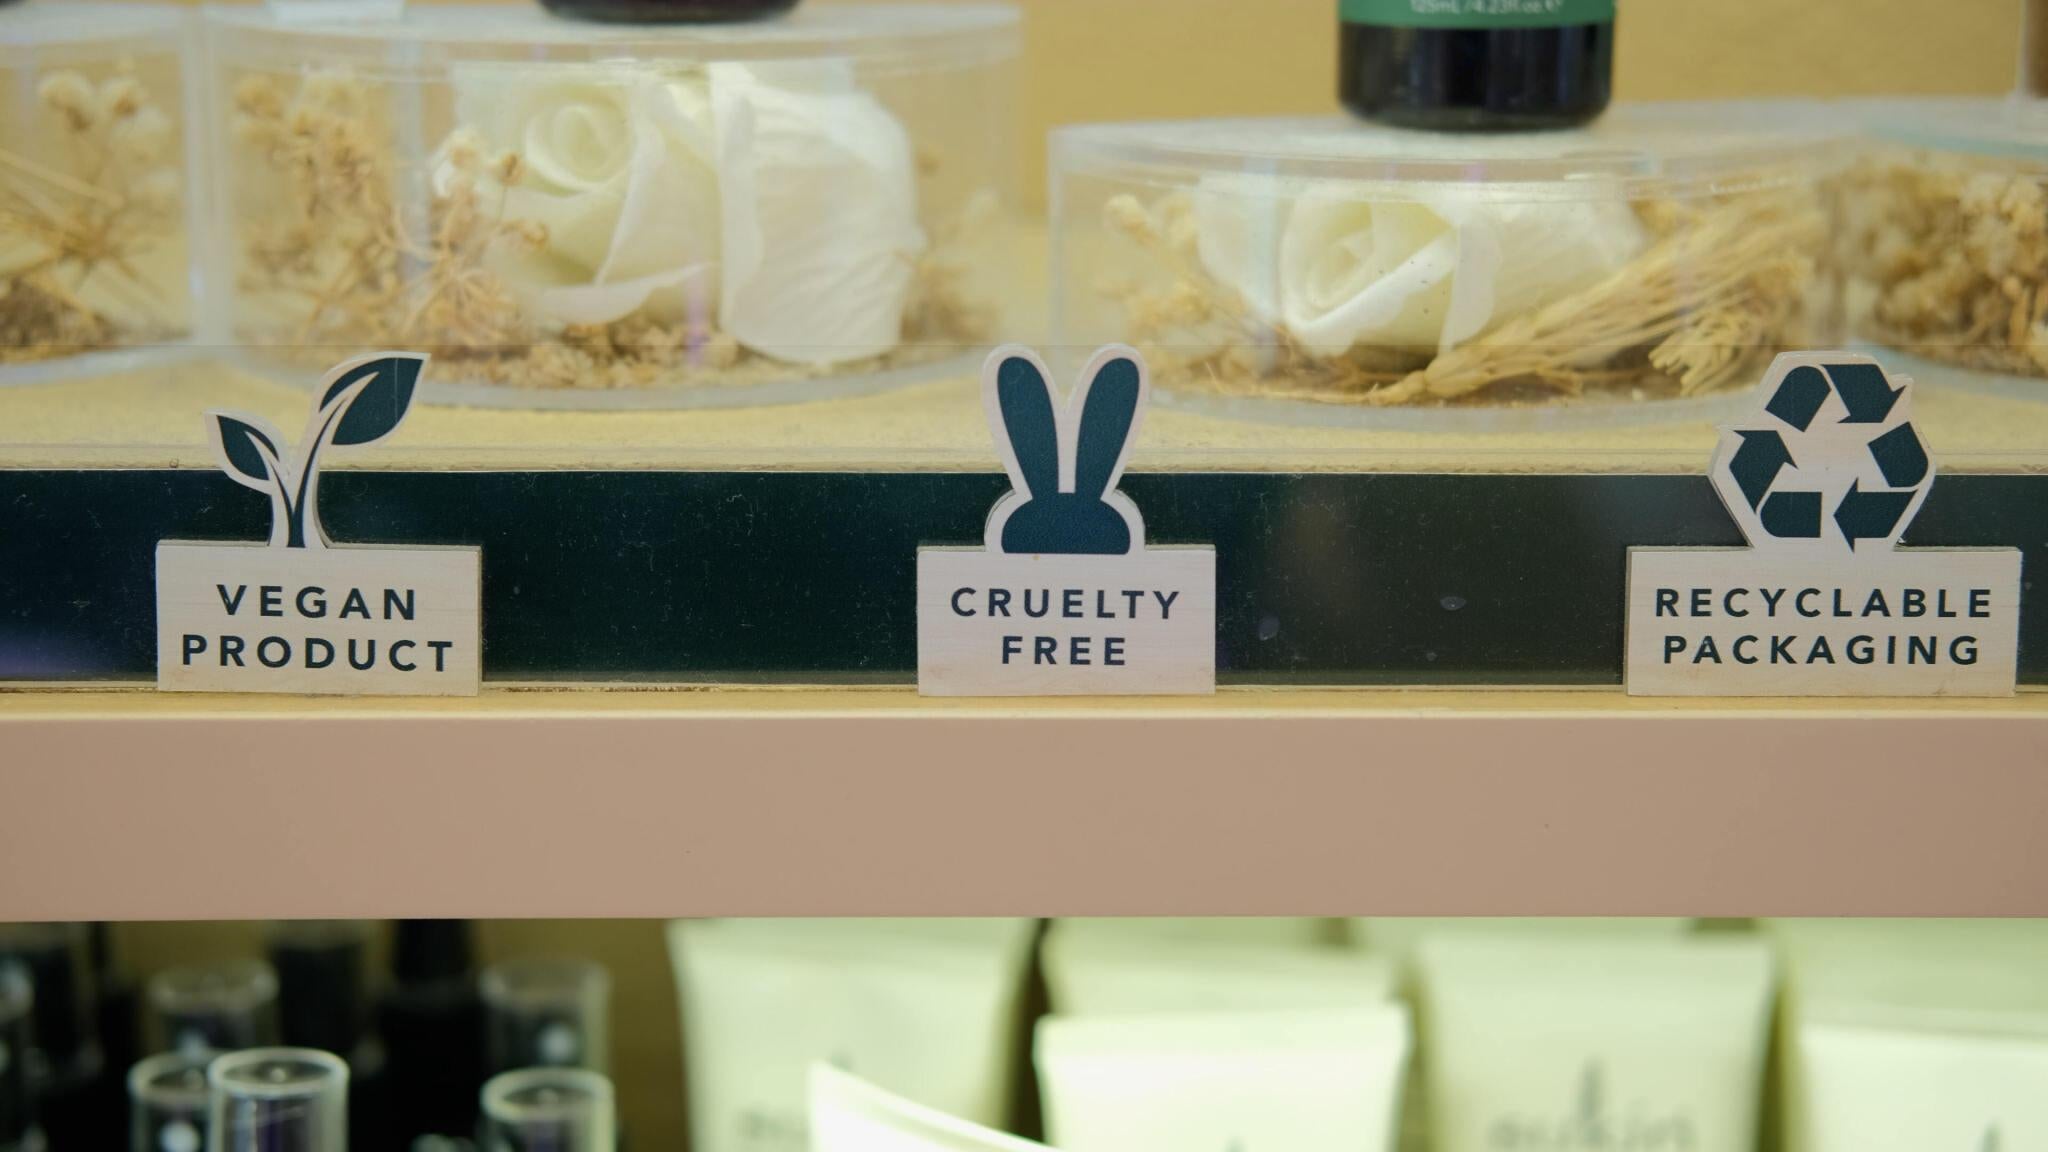 Ethical Beauty: Understanding Vegan and Cruelty-Free Labels